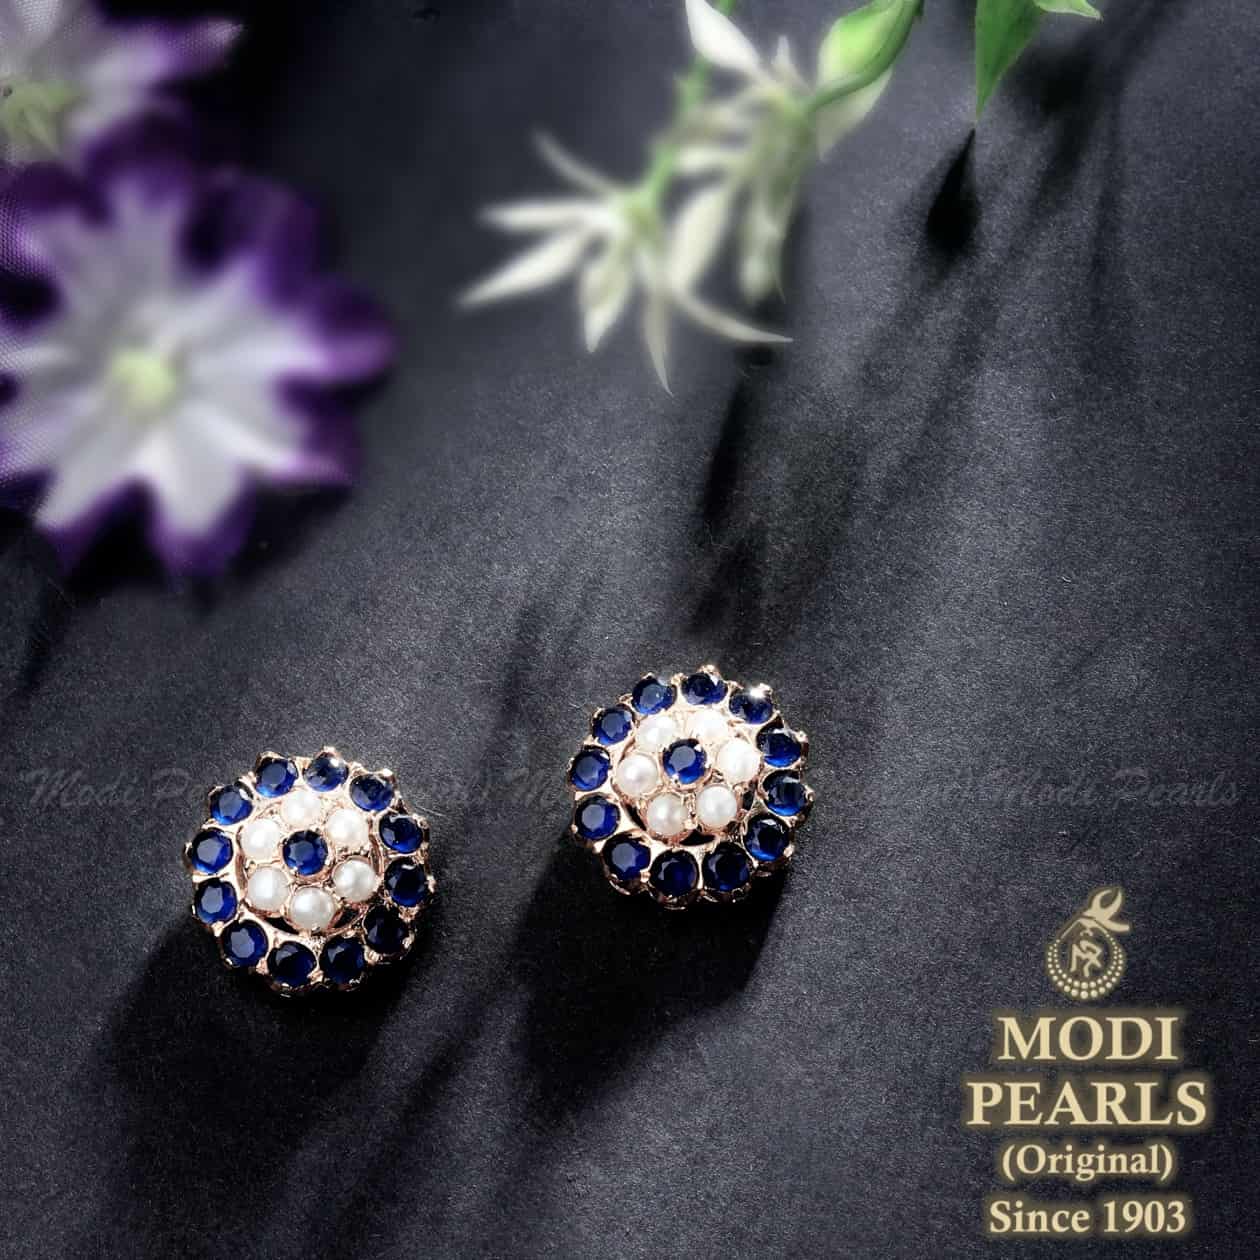 Buy Oxidised White Pearls With Green Stone Earrings, Oxidised Rings - Shop  From The Latest Collection Of Indian Rings and Jewellery For Women & Girls  Online, Oxidized Ring. Buy Studs, Ear Cuff,